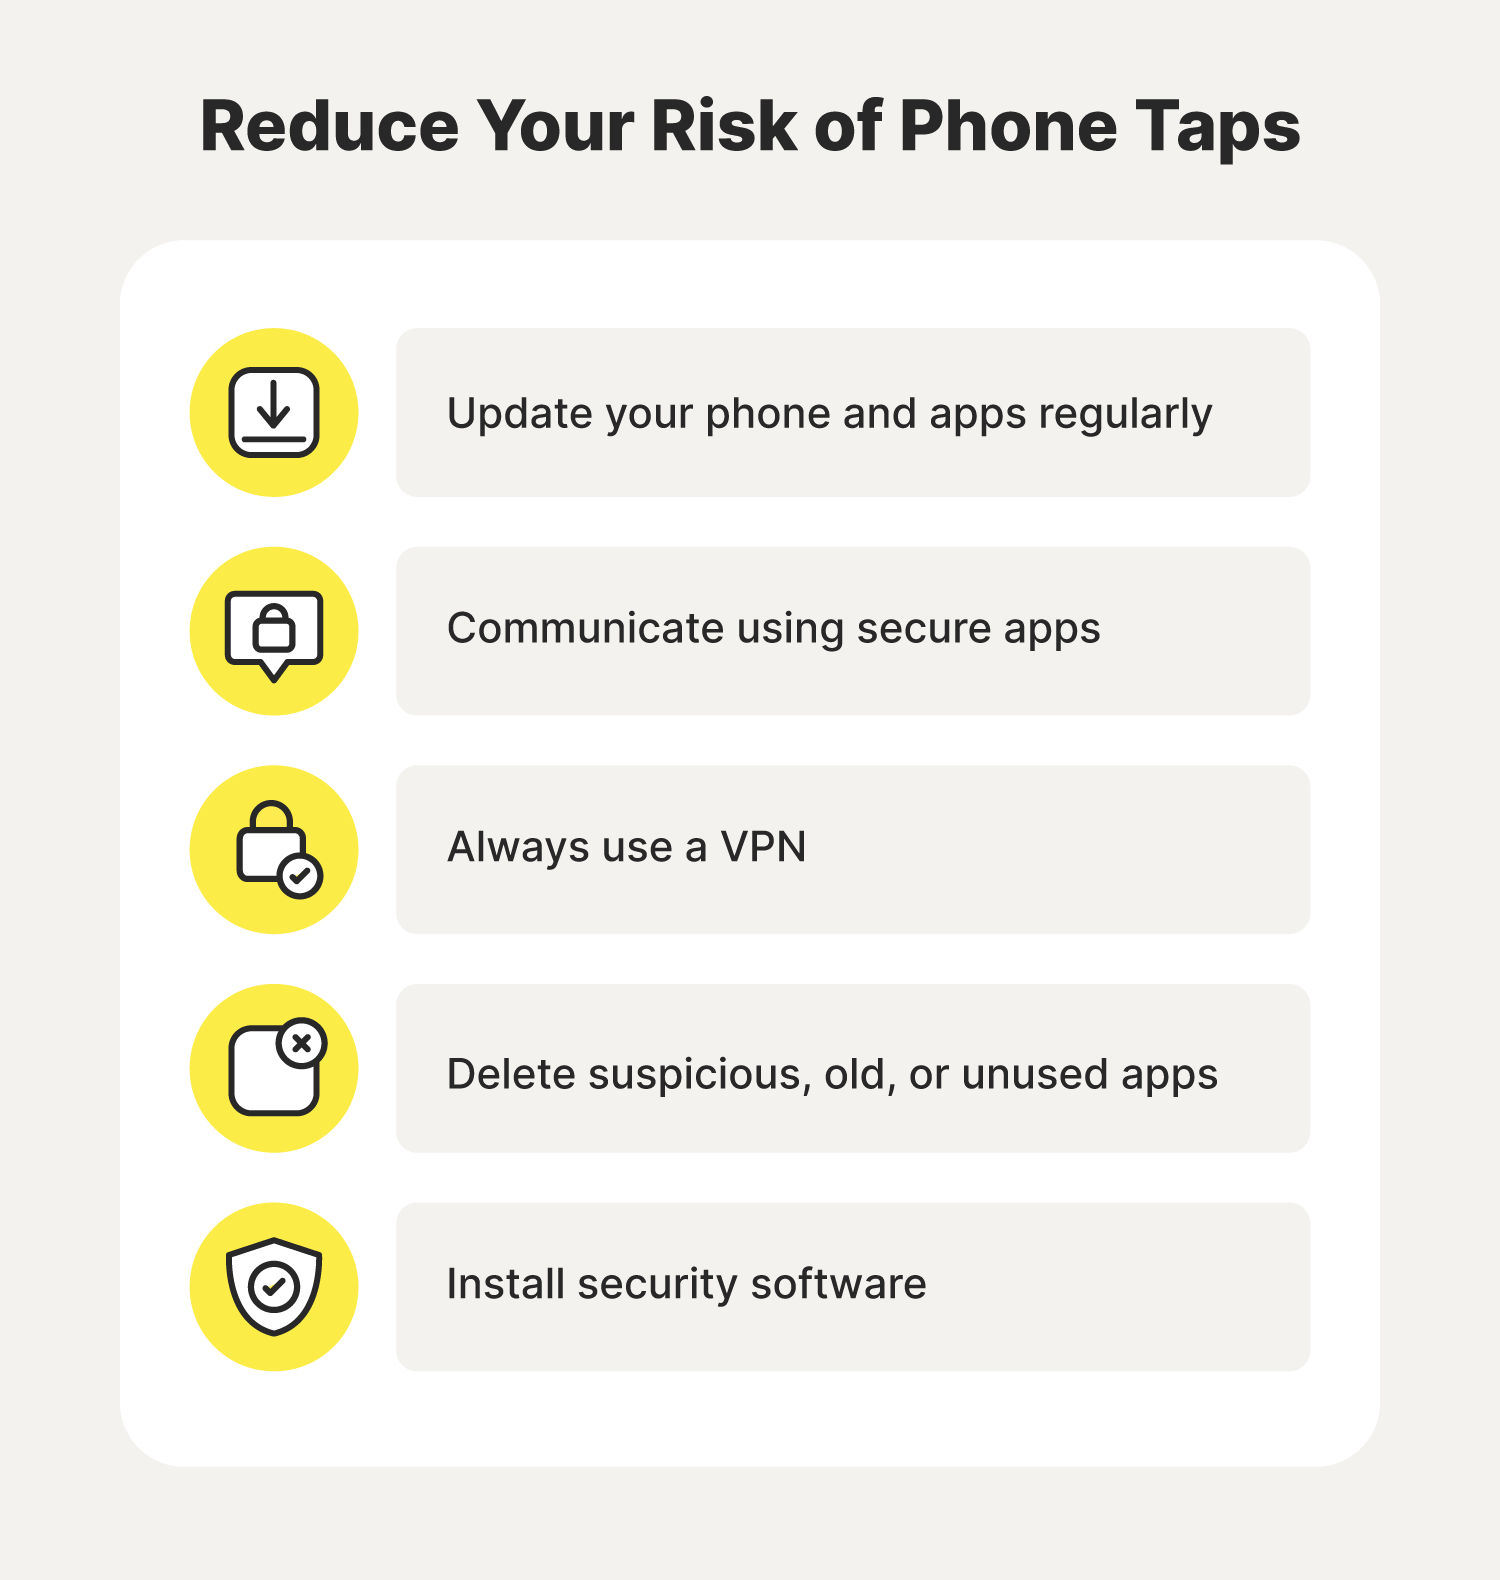 Illustration showing how to reduce your risk of phone taps.